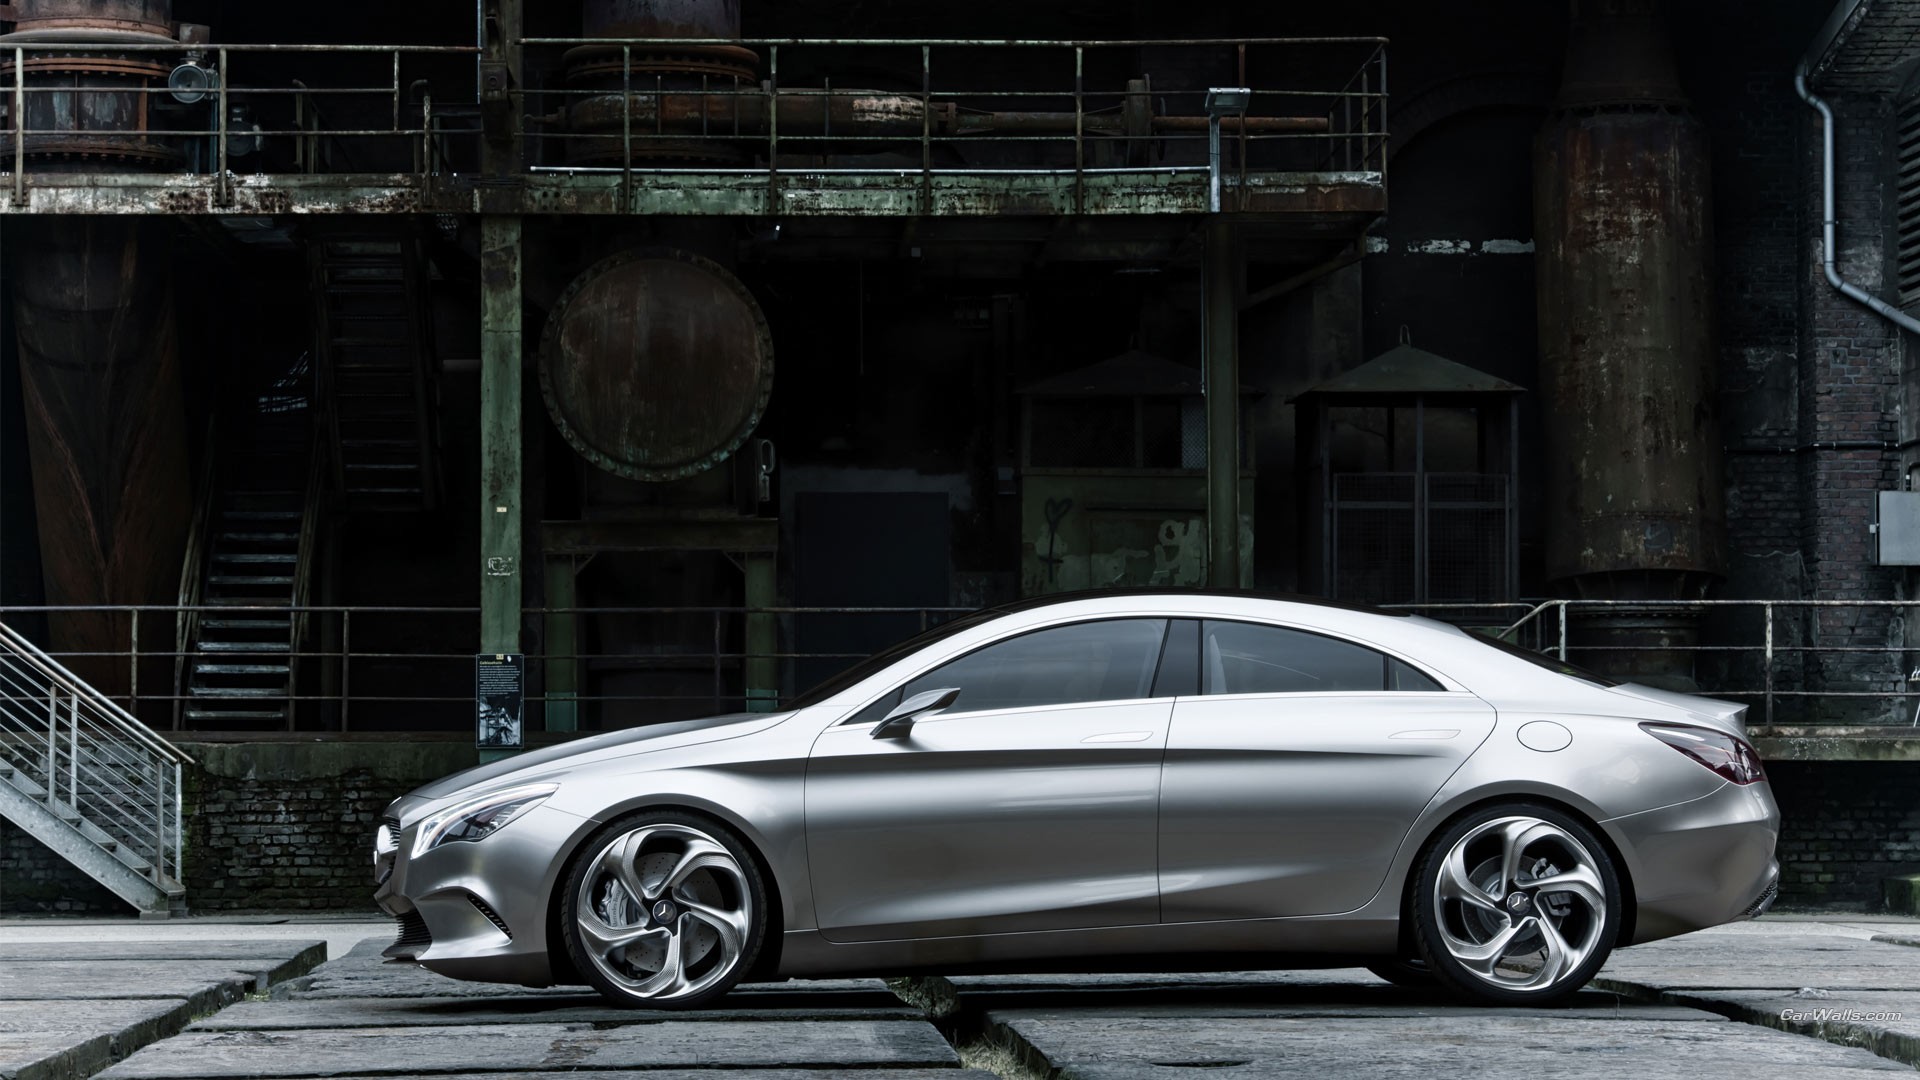 Mercedes Style Coupe, Concept Cars Wallpaper